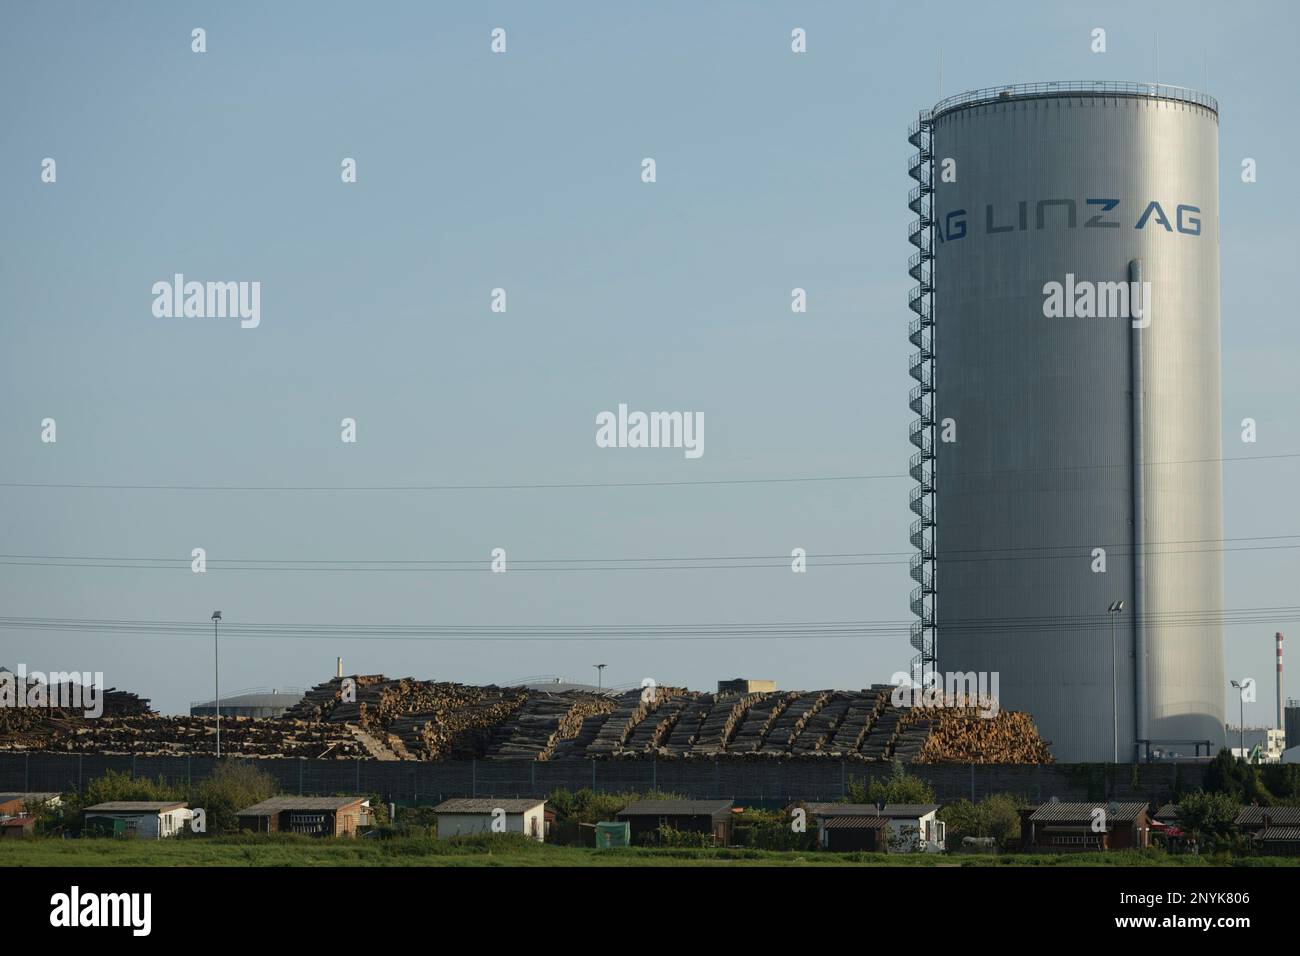 Linz / Austria - In a biomass power plant, huge piles of logs are stored, waiting to be burned and turned into climate damaging CO2. Stock Photo